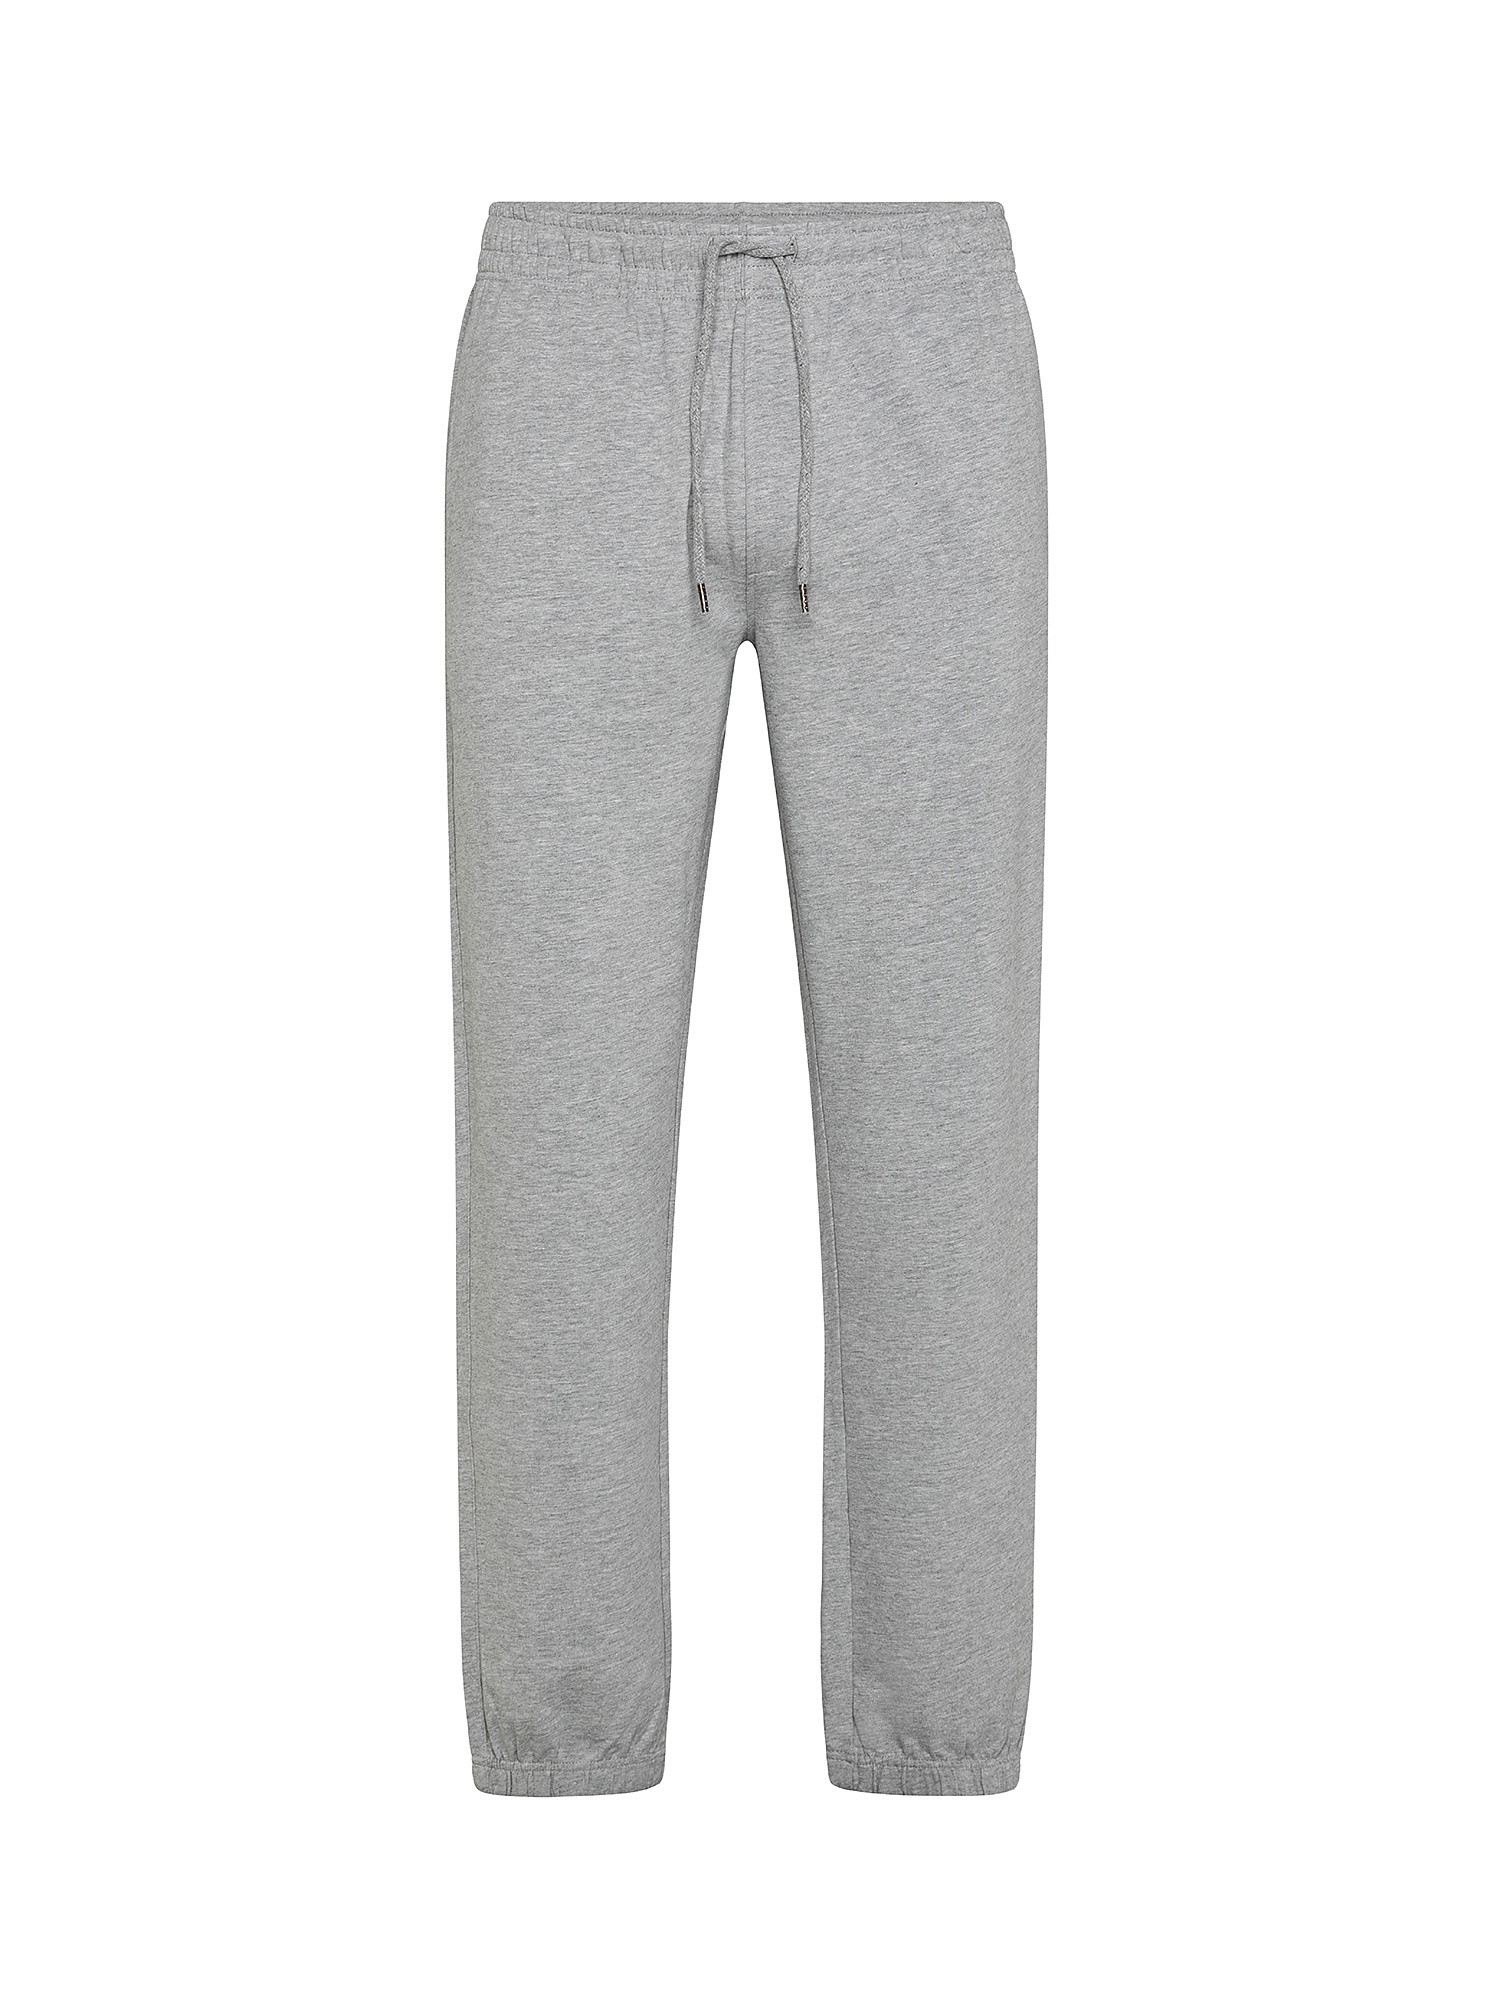 Fleece trousers, Light Grey, large image number 0